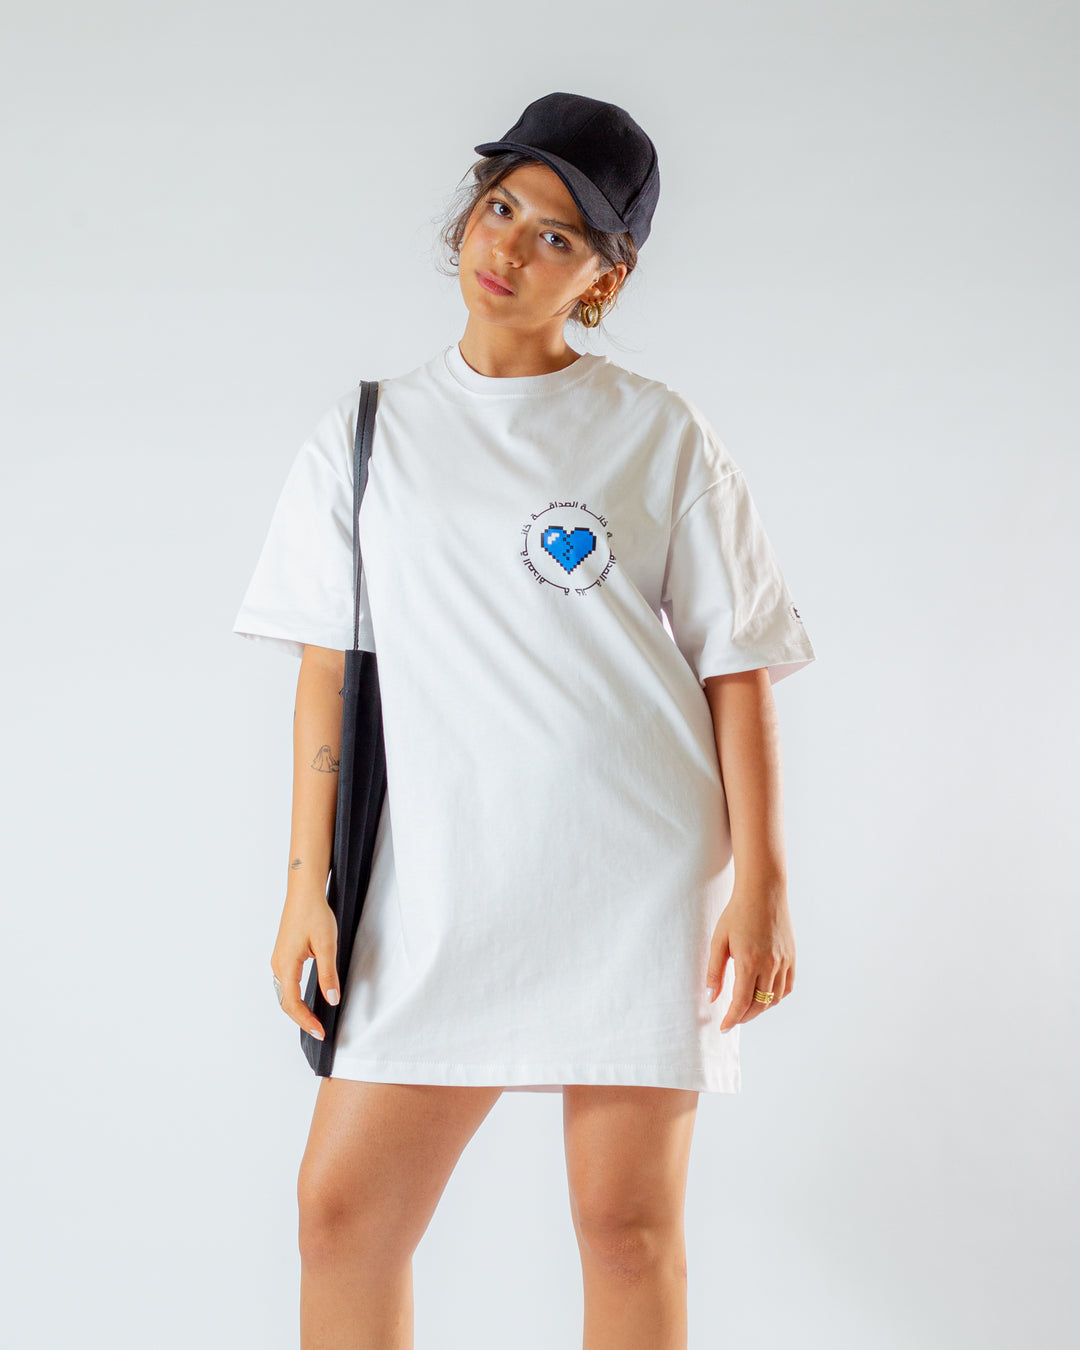 Young adult female wearing an Oversized white T-Dress with Khanat Al Sadaka written in Arabic خانة الصداقة and printed in blue and black silkscreen on the side of the dress along with a black cap on her head and a black tote bag.